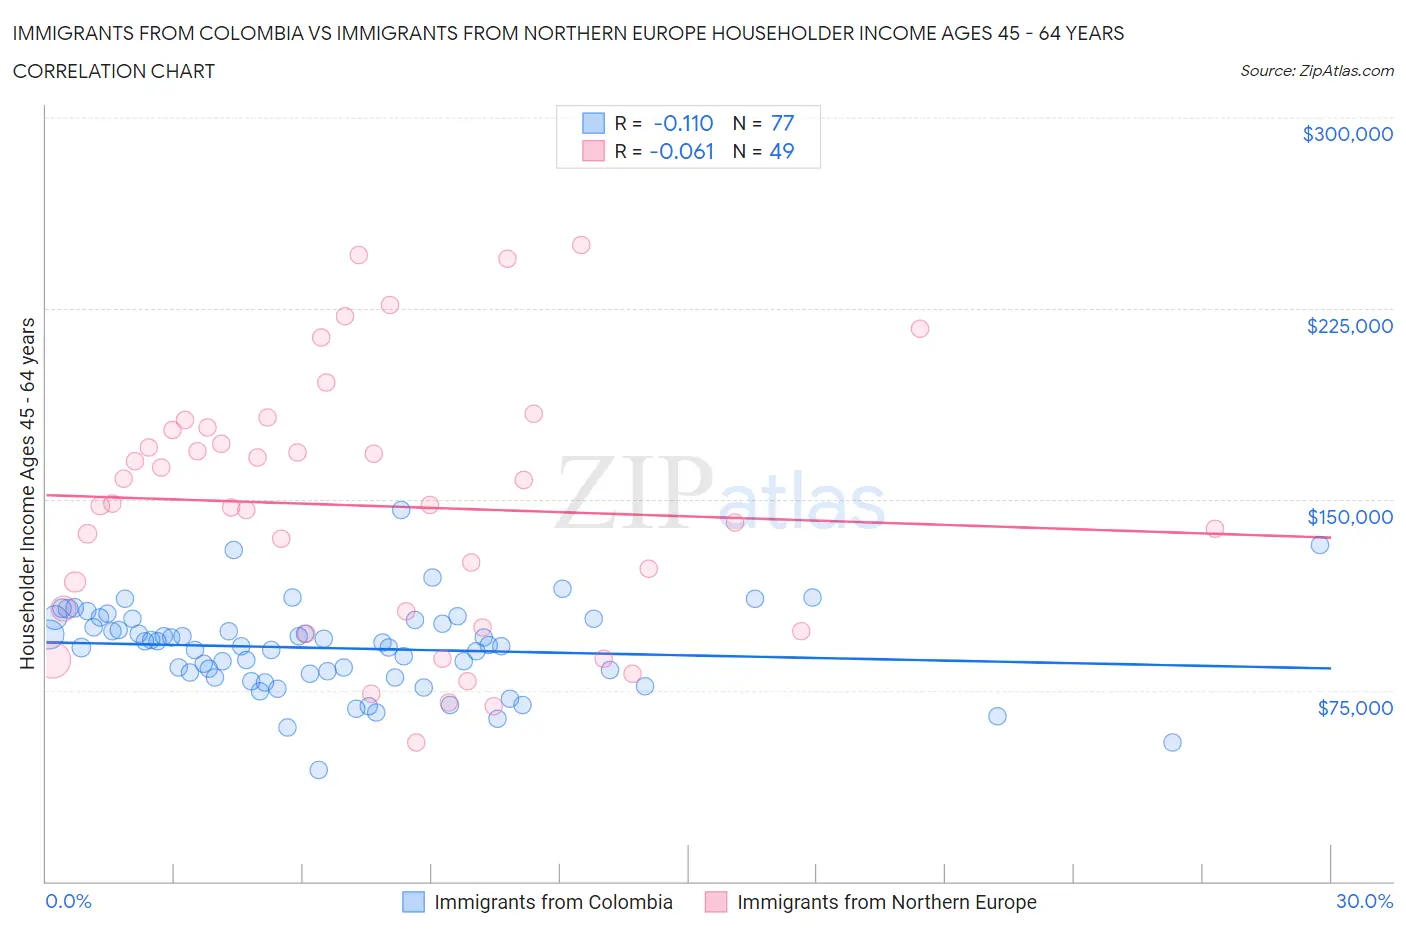 Immigrants from Colombia vs Immigrants from Northern Europe Householder Income Ages 45 - 64 years